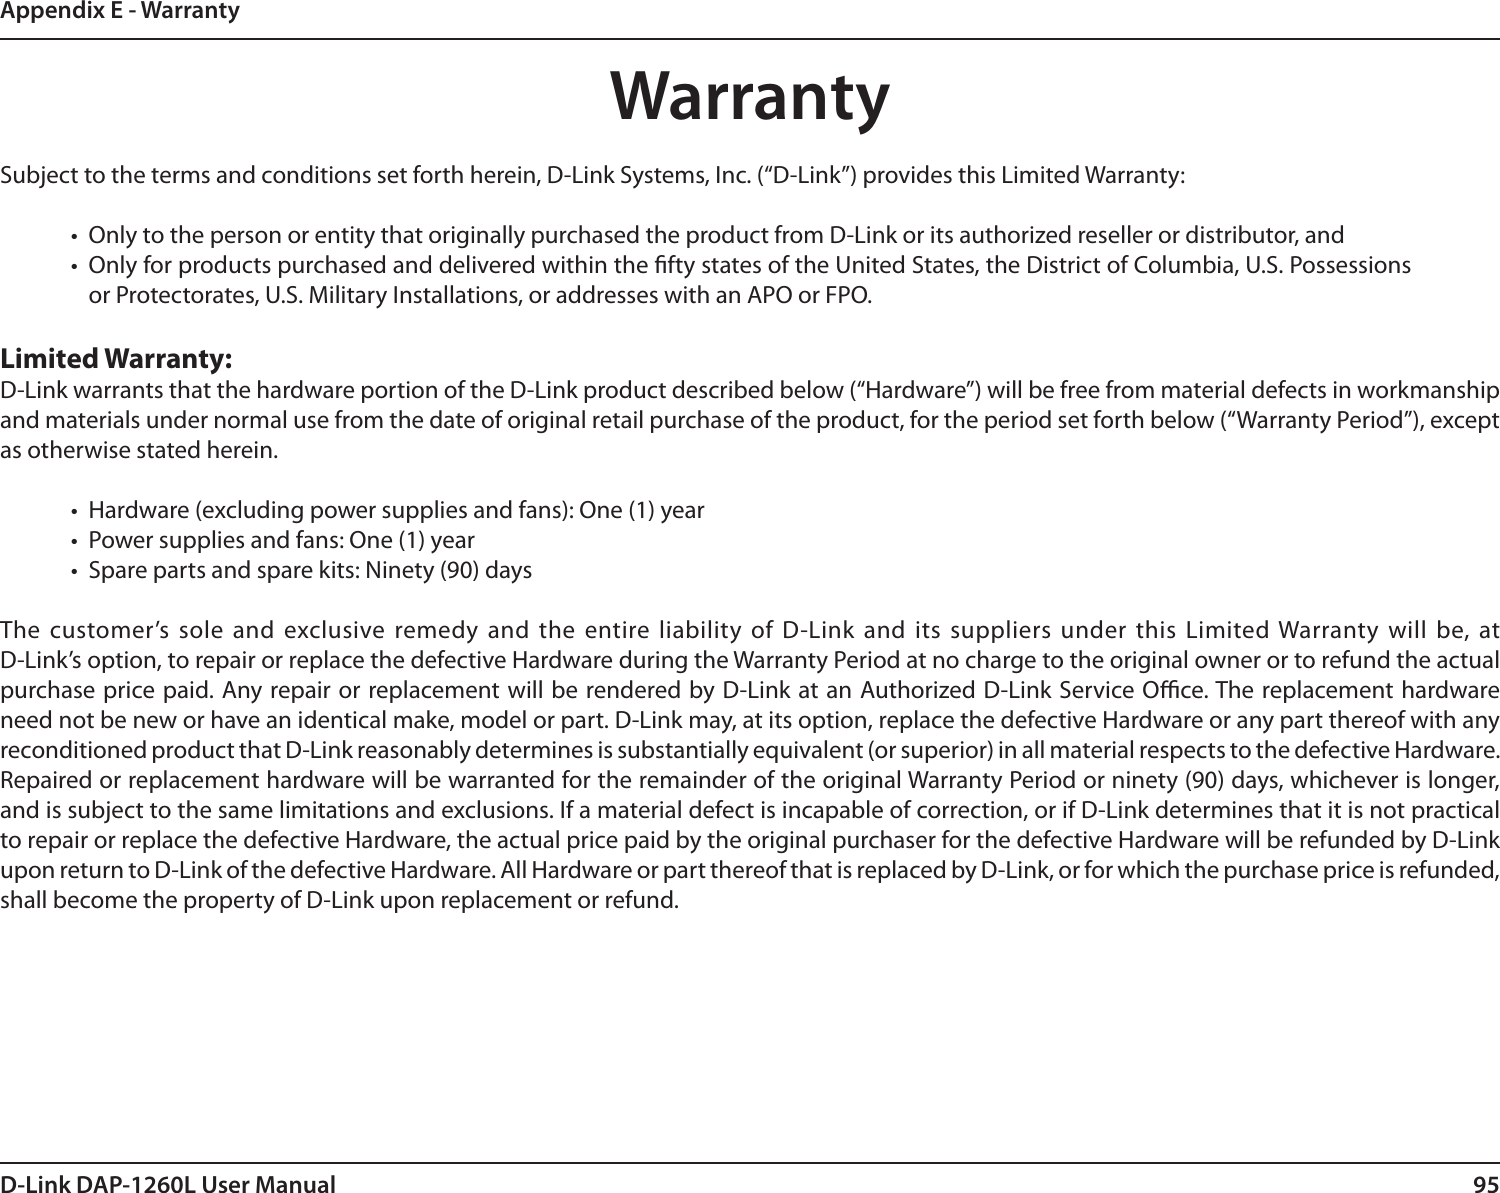 95D-Link DAP-1260L User ManualAppendix E - WarrantyWarrantySubject to the terms and conditions set forth herein, D-Link Systems, Inc. (“D-Link”) provides this Limited Warranty:•  Only to the person or entity that originally purchased the product from D-Link or its authorized reseller or distributor, and•  Only for products purchased and delivered within the fty states of the United States, the District of Columbia, U.S. Possessions or Protectorates, U.S. Military Installations, or addresses with an APO or FPO.Limited Warranty:D-Link warrants that the hardware portion of the D-Link product described below (“Hardware”) will be free from material defects in workmanship and materials under normal use from the date of original retail purchase of the product, for the period set forth below (“Warranty Period”), except as otherwise stated herein.•  Hardware (excluding power supplies and fans): One (1) year•  Power supplies and fans: One (1) year•  Spare parts and spare kits: Ninety (90) daysThe customer’s  sole and  exclusive remedy and the entire liability of  D-Link and its  suppliers under this  Limited Warranty will be, at  D-Link’s option, to repair or replace the defective Hardware during the Warranty Period at no charge to the original owner or to refund the actual purchase price paid. Any repair or replacement will be rendered by D-Link at an Authorized D-Link Service Oce. The replacement hardware need not be new or have an identical make, model or part. D-Link may, at its option, replace the defective Hardware or any part thereof with any reconditioned product that D-Link reasonably determines is substantially equivalent (or superior) in all material respects to the defective Hardware. Repaired or replacement hardware will be warranted for the remainder of the original Warranty Period or ninety (90) days, whichever is longer, and is subject to the same limitations and exclusions. If a material defect is incapable of correction, or if D-Link determines that it is not practical to repair or replace the defective Hardware, the actual price paid by the original purchaser for the defective Hardware will be refunded by D-Link upon return to D-Link of the defective Hardware. All Hardware or part thereof that is replaced by D-Link, or for which the purchase price is refunded, shall become the property of D-Link upon replacement or refund.